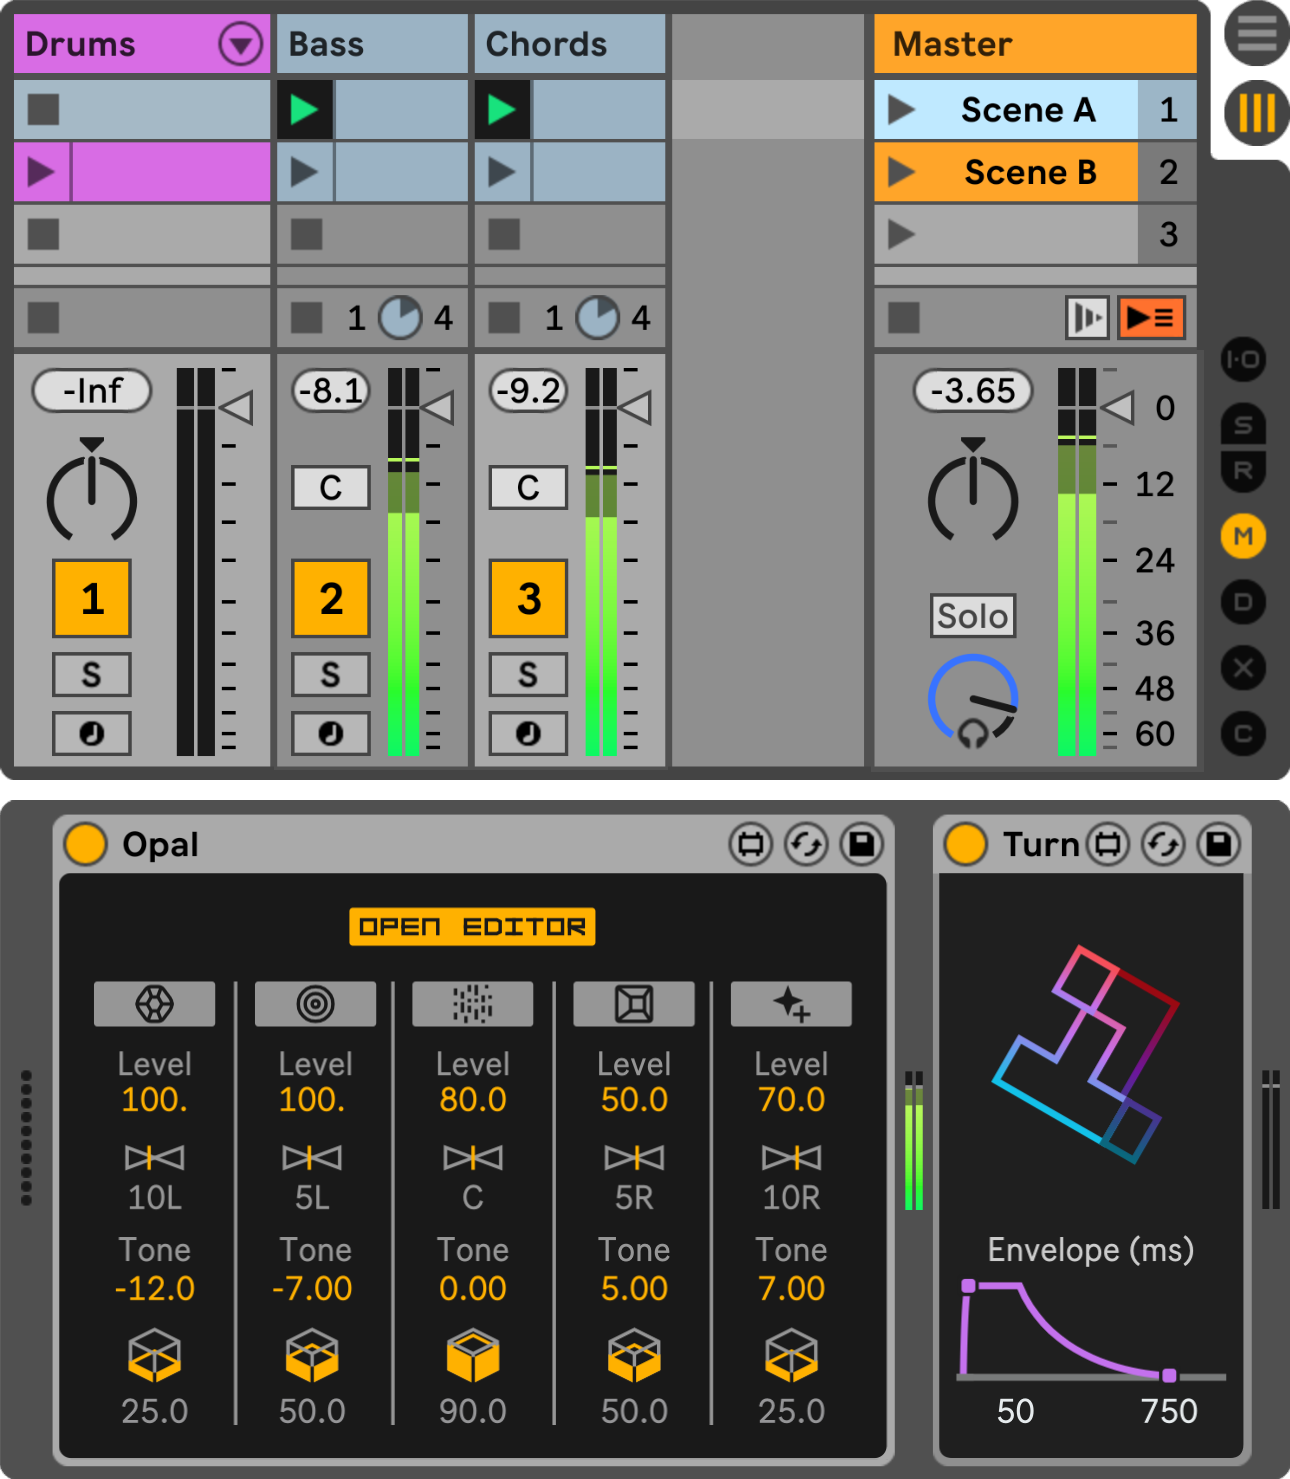 Turn mutes input audio signals because there are no launched Session View clips on Track 1